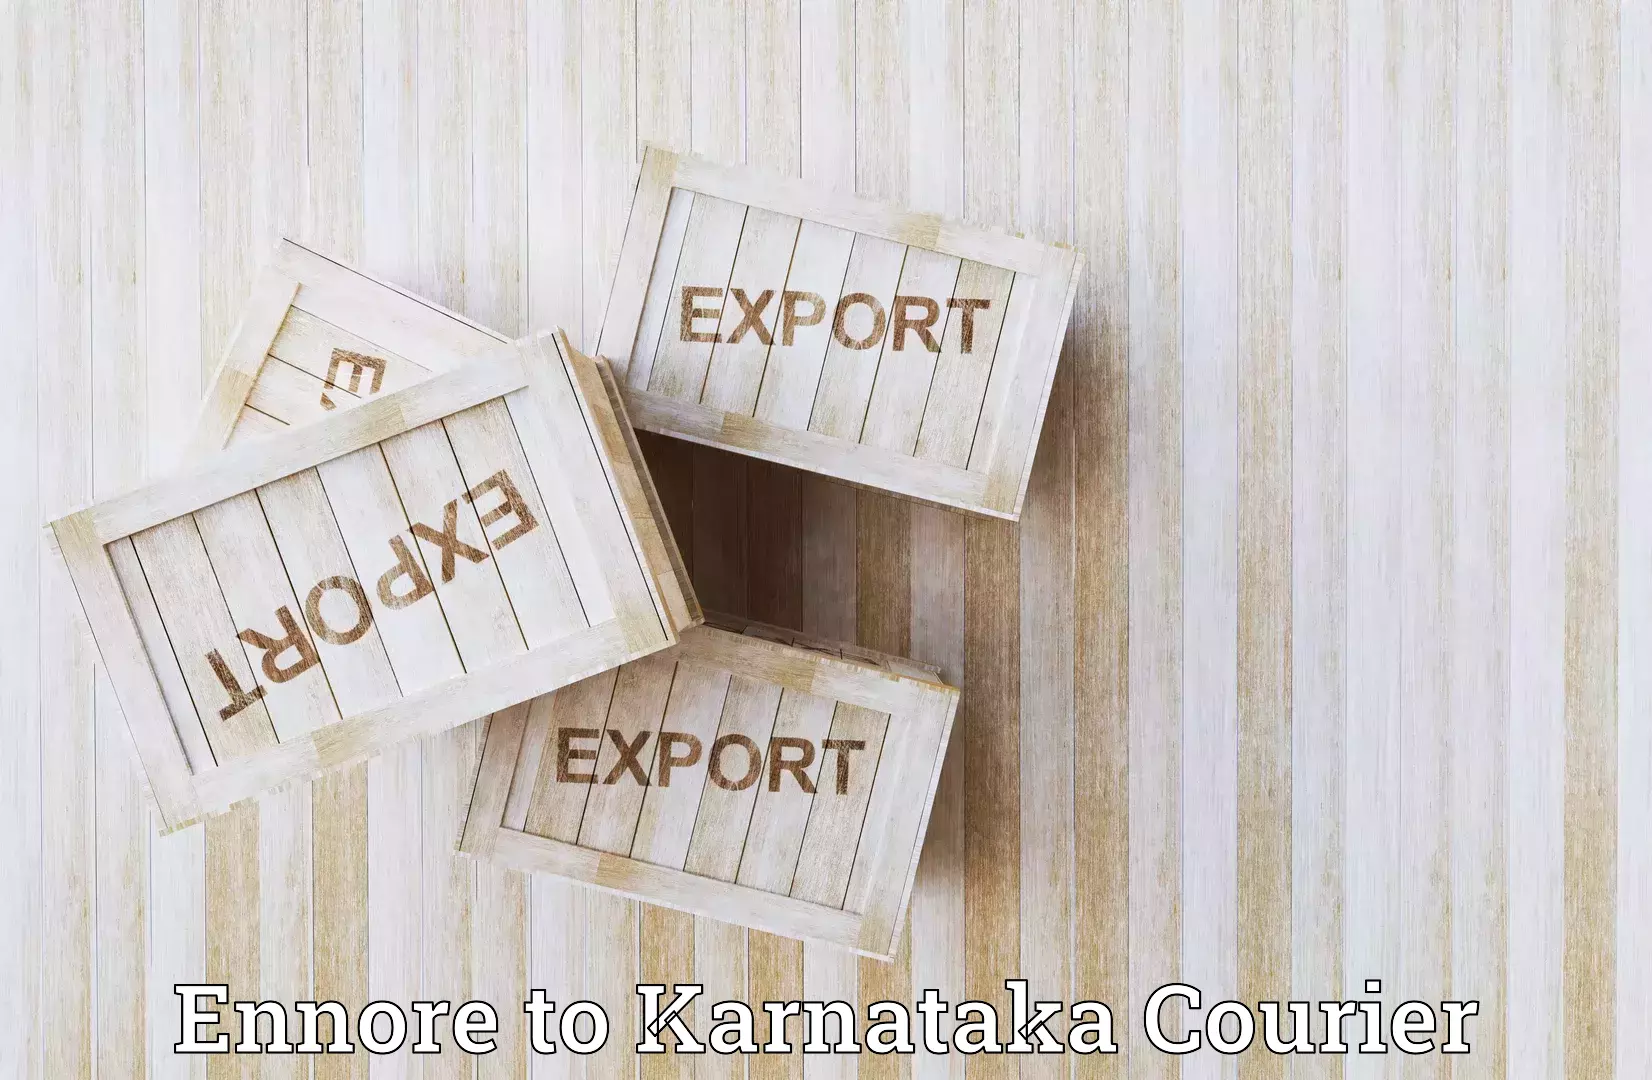 Seamless shipping experience Ennore to Chikkamagaluru